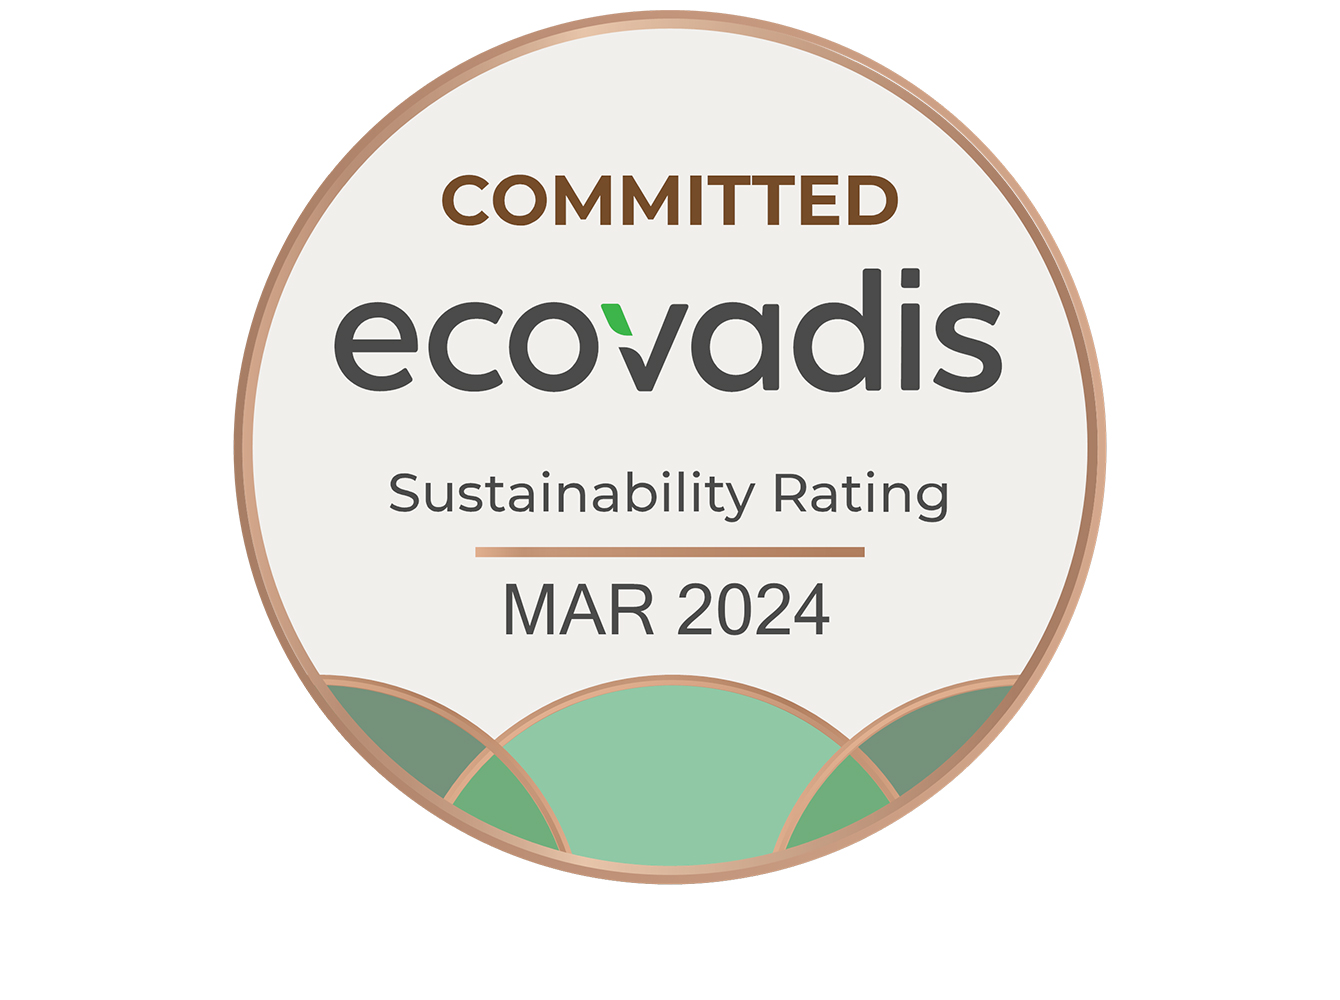 Committed medal from Ecovadis